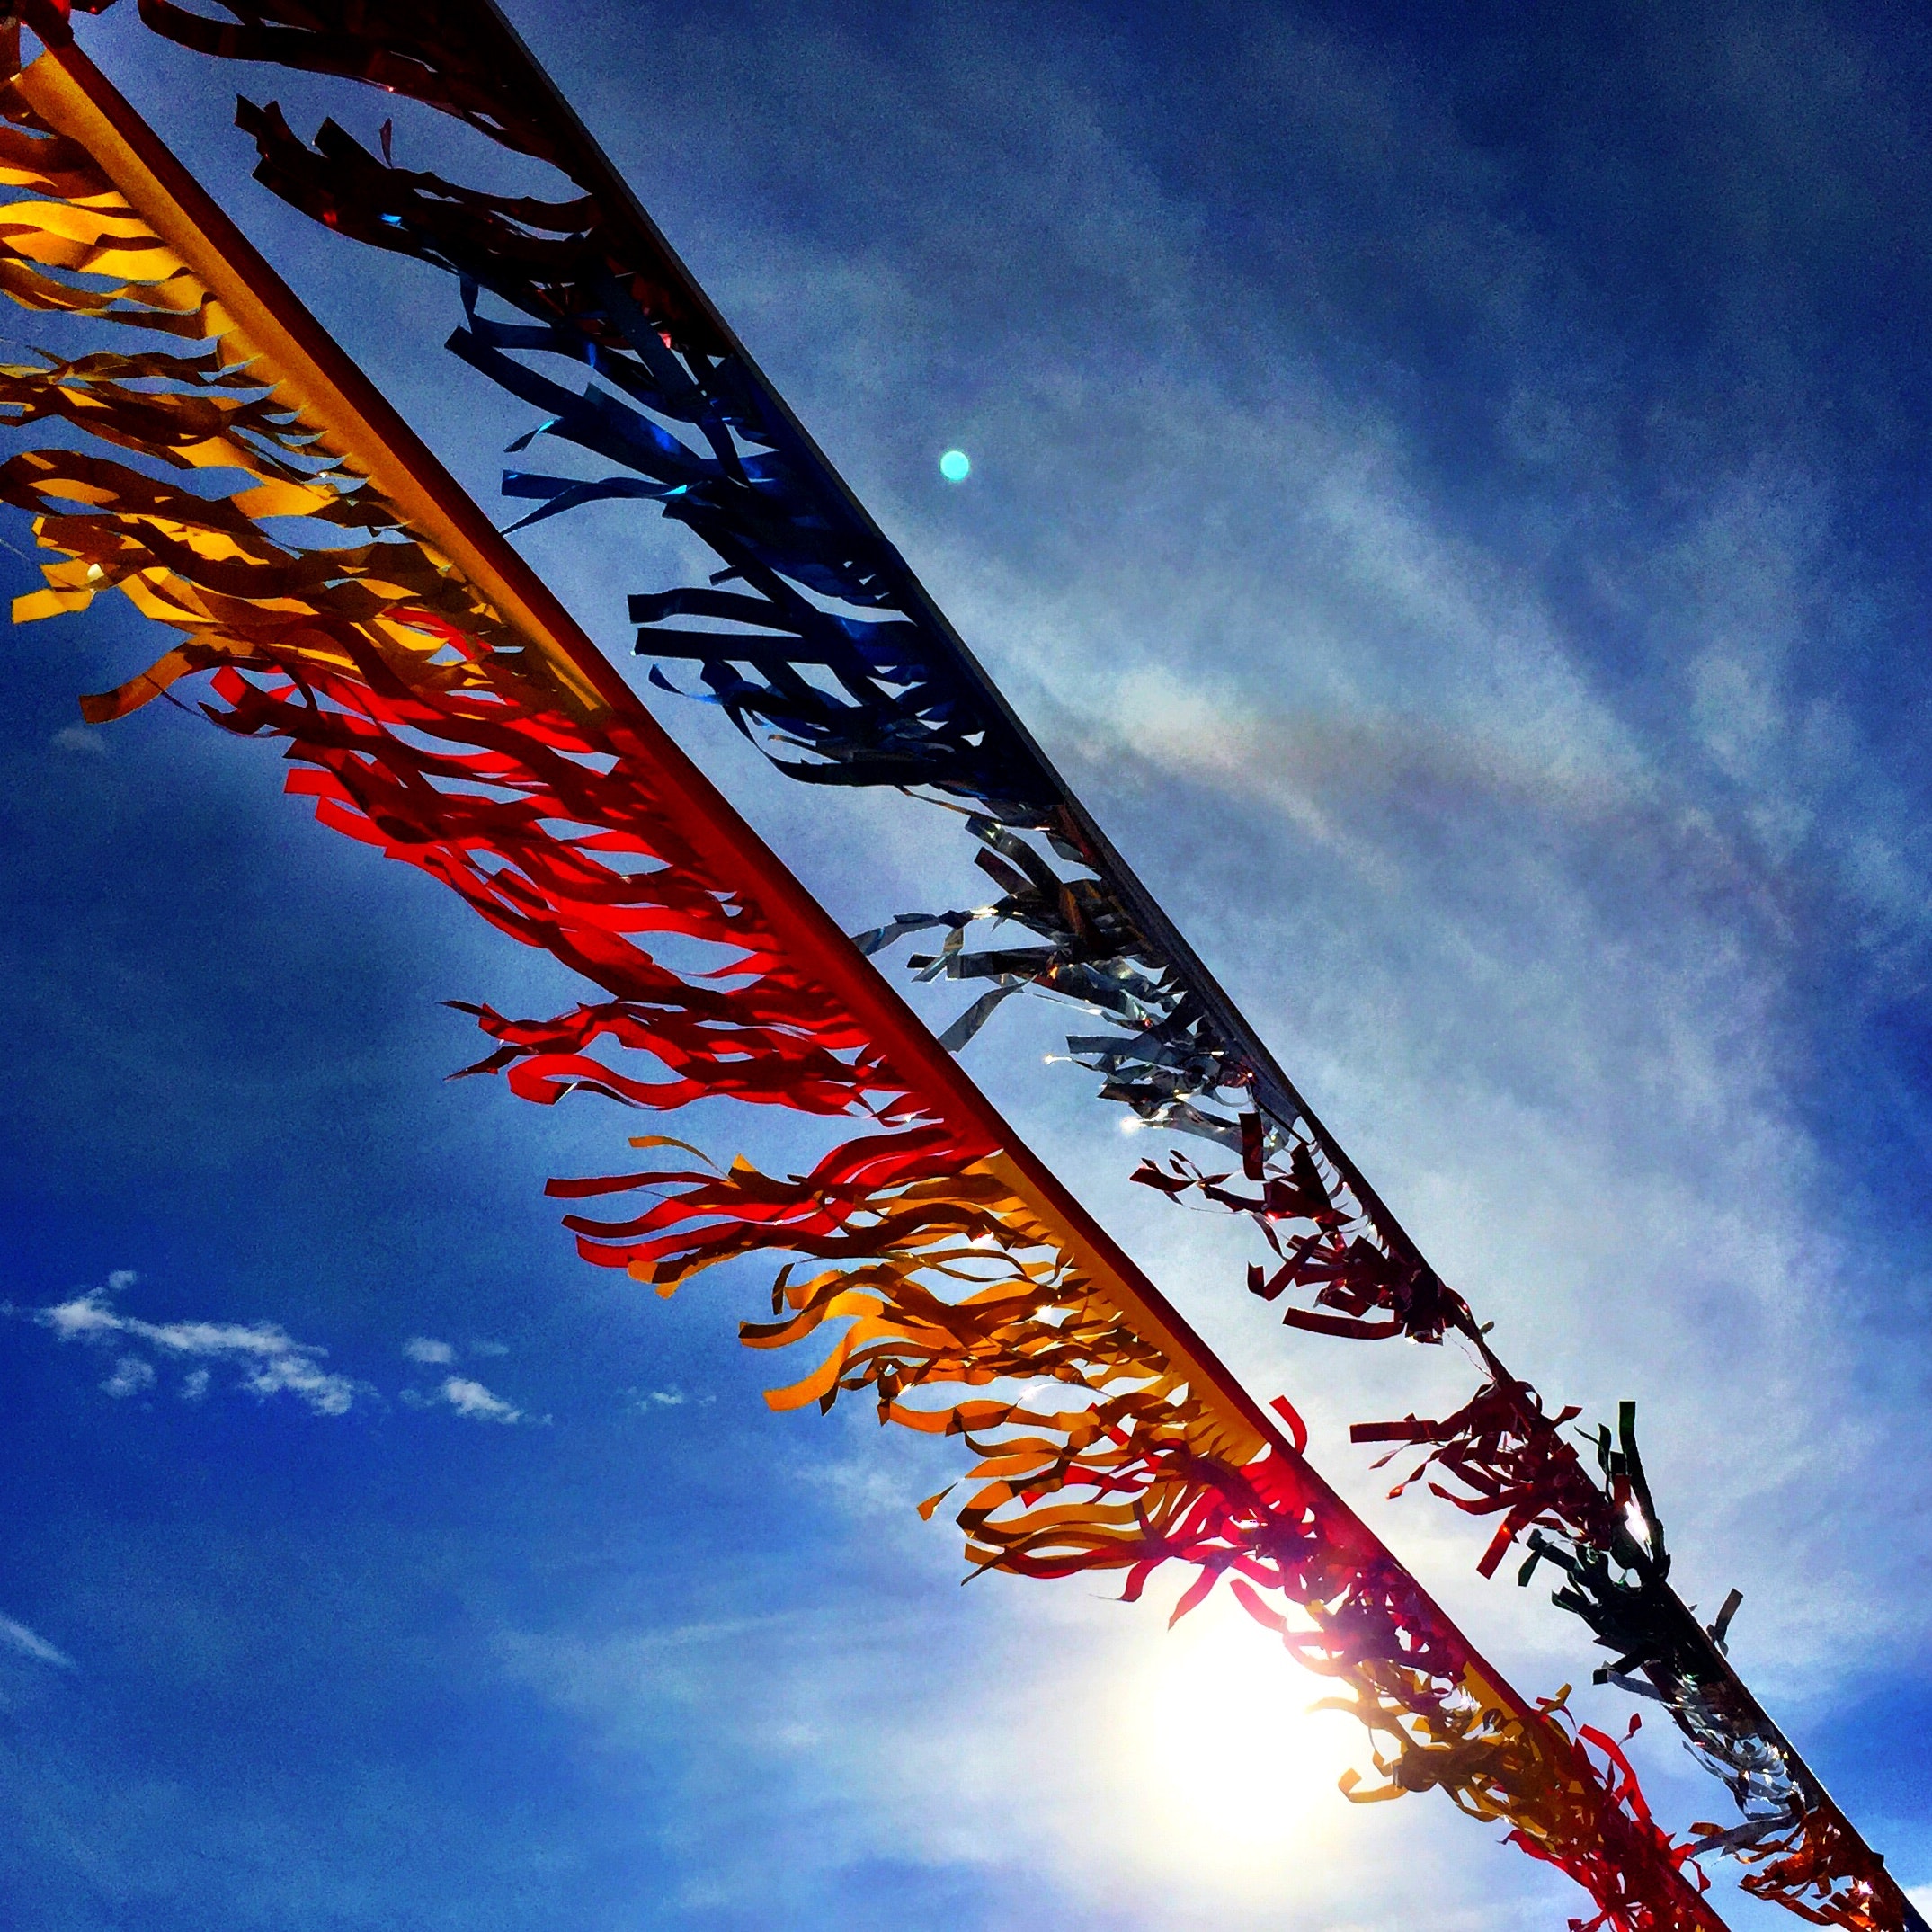 Banners under blue sky photo